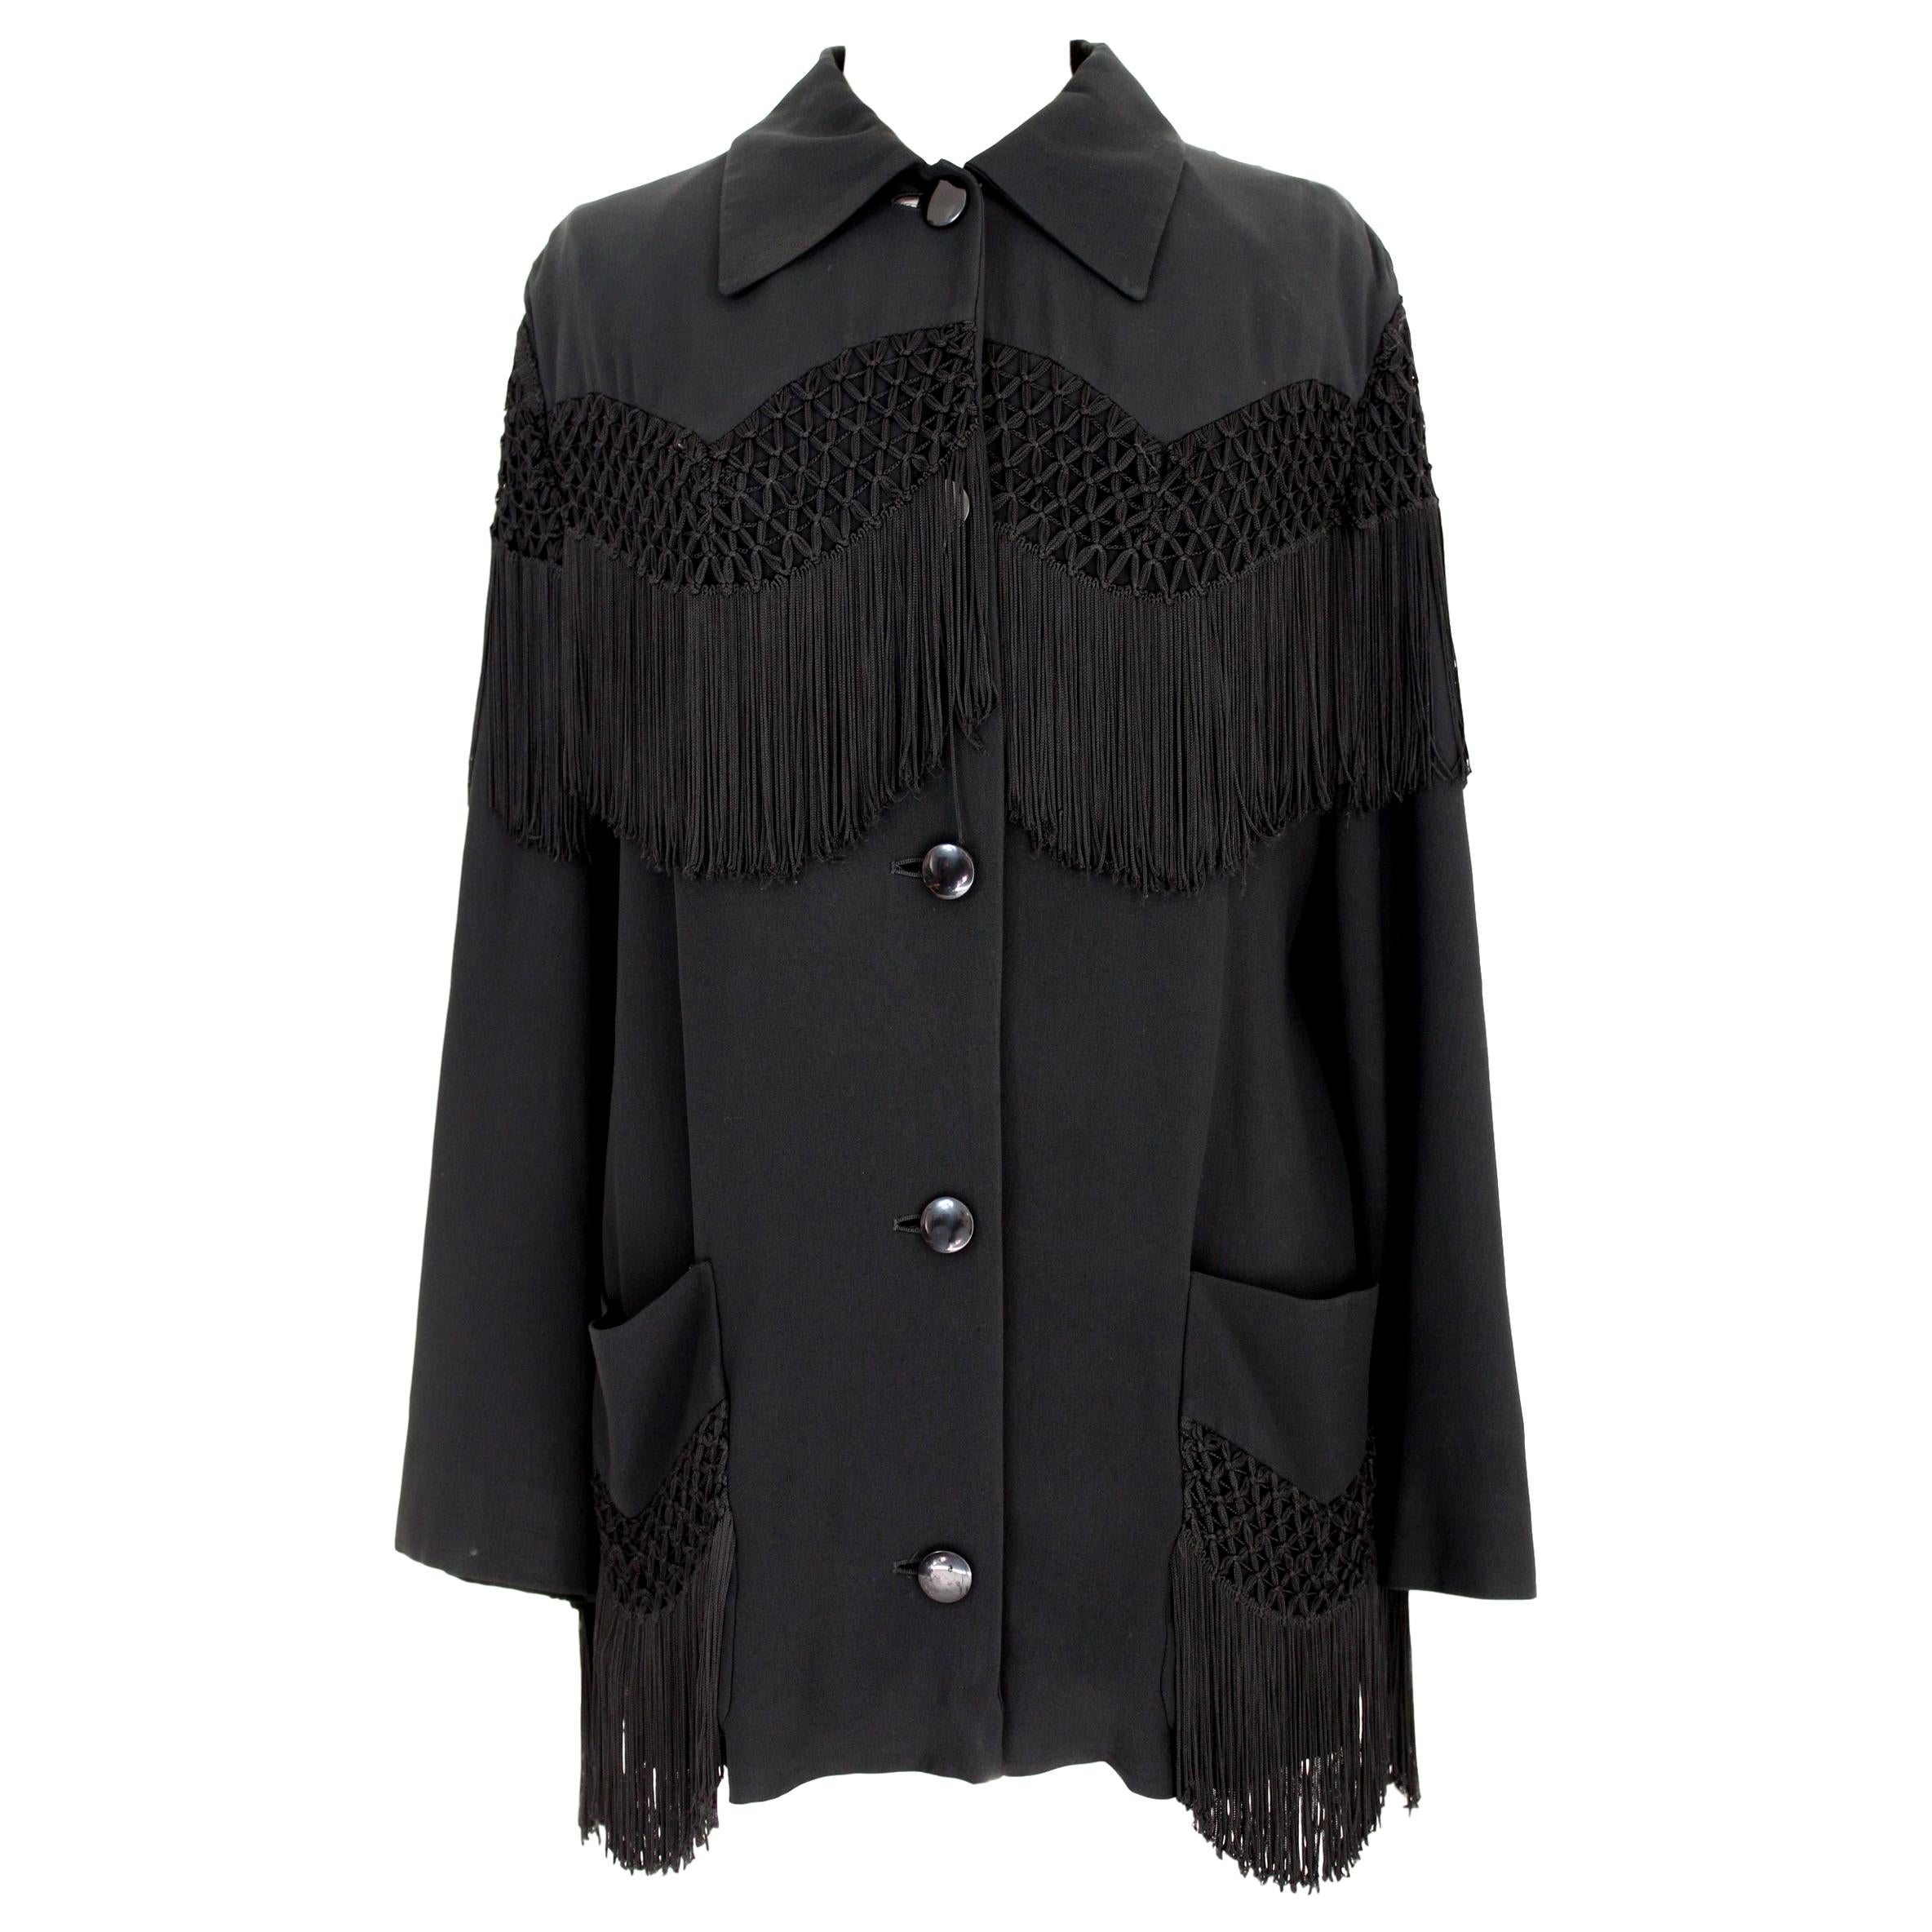 Moschino Couture Black Fringe Country Western Jacket 1980s